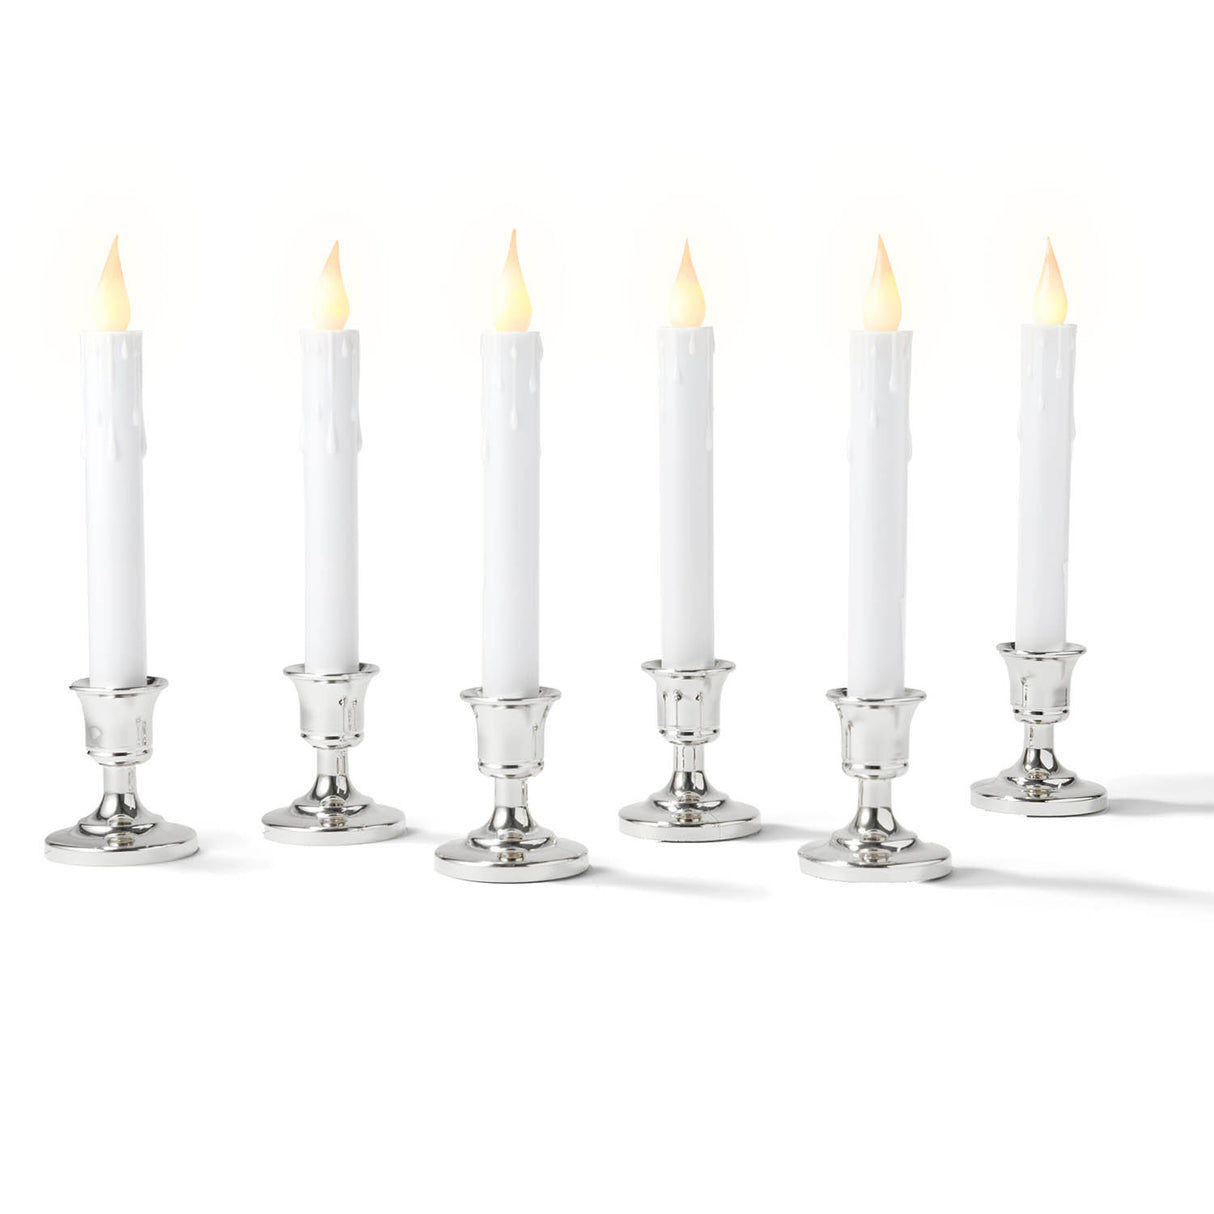 Ivy White Flameless Resin Window Candles with Removable Silver Bases, Set of 6